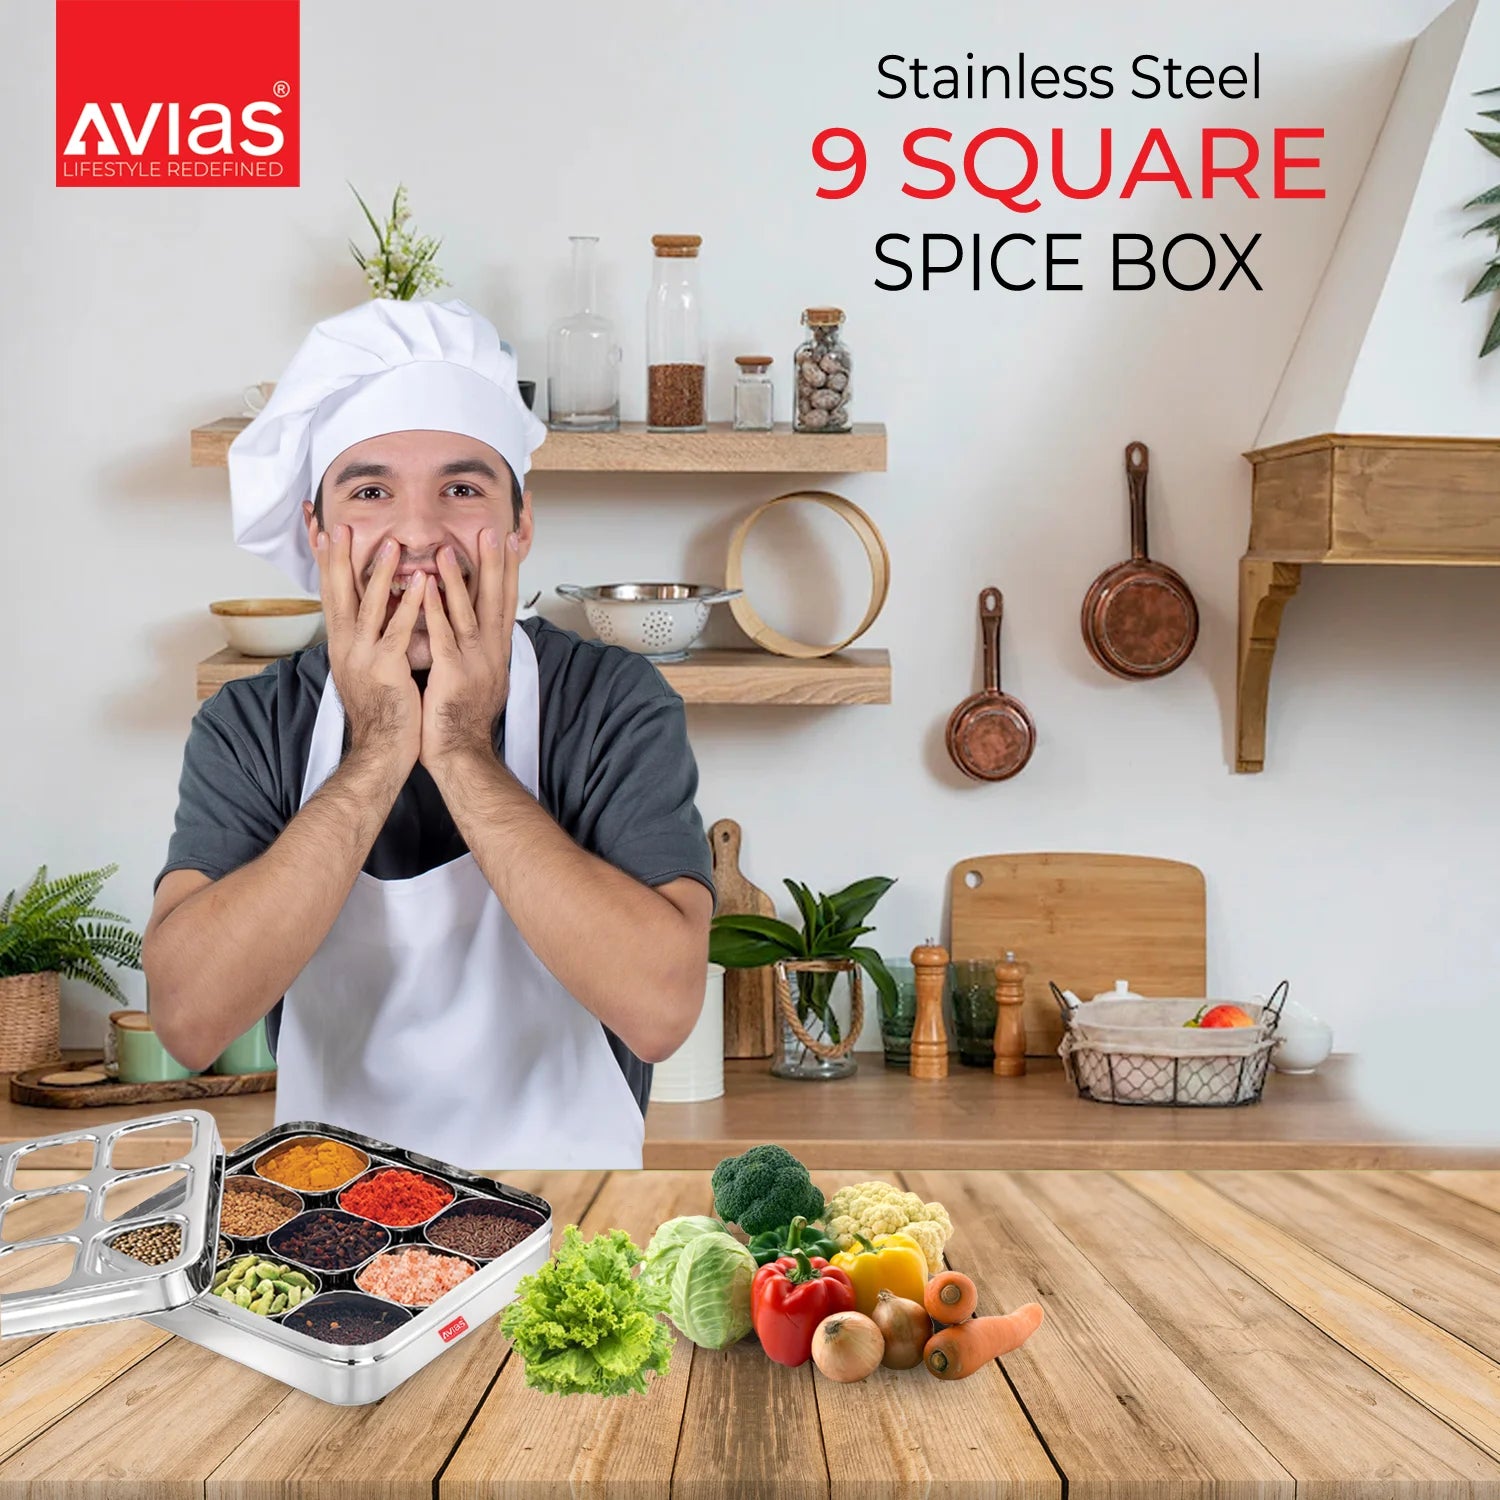 AVIAS stainless steel dry fruit cum spice box with 9 square compartments for kitchen storing spices